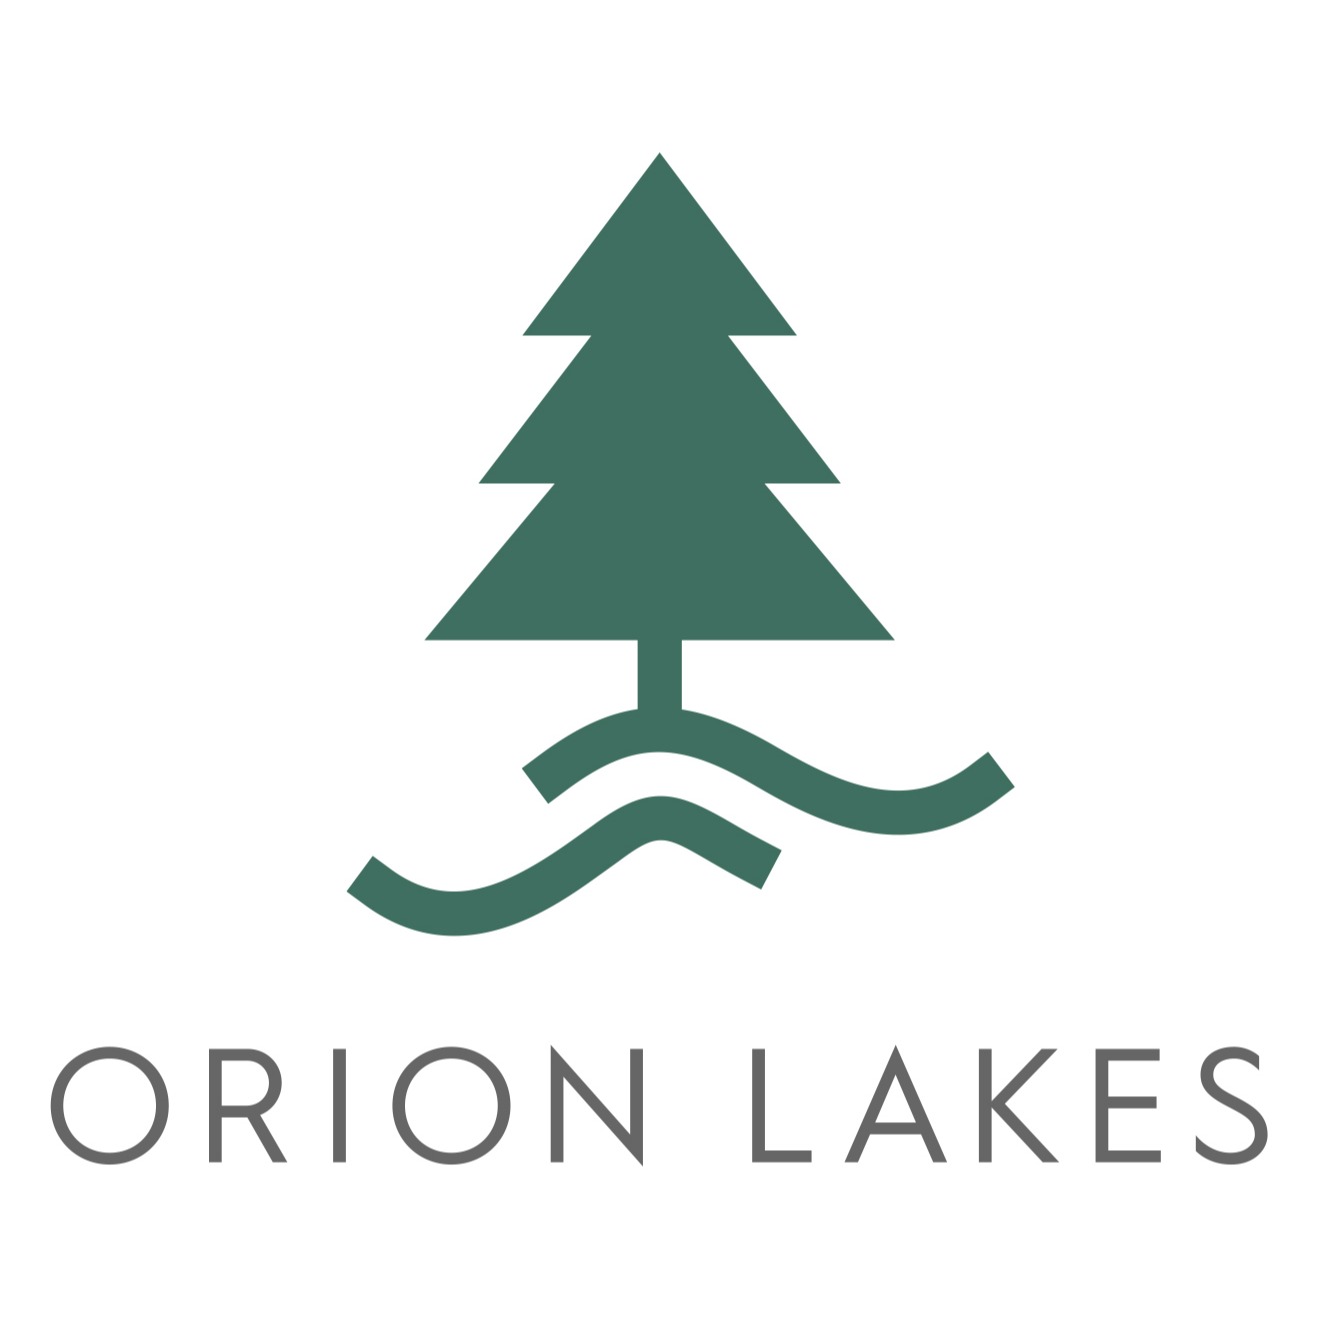 Orion Lakes is under new professional and caring management.